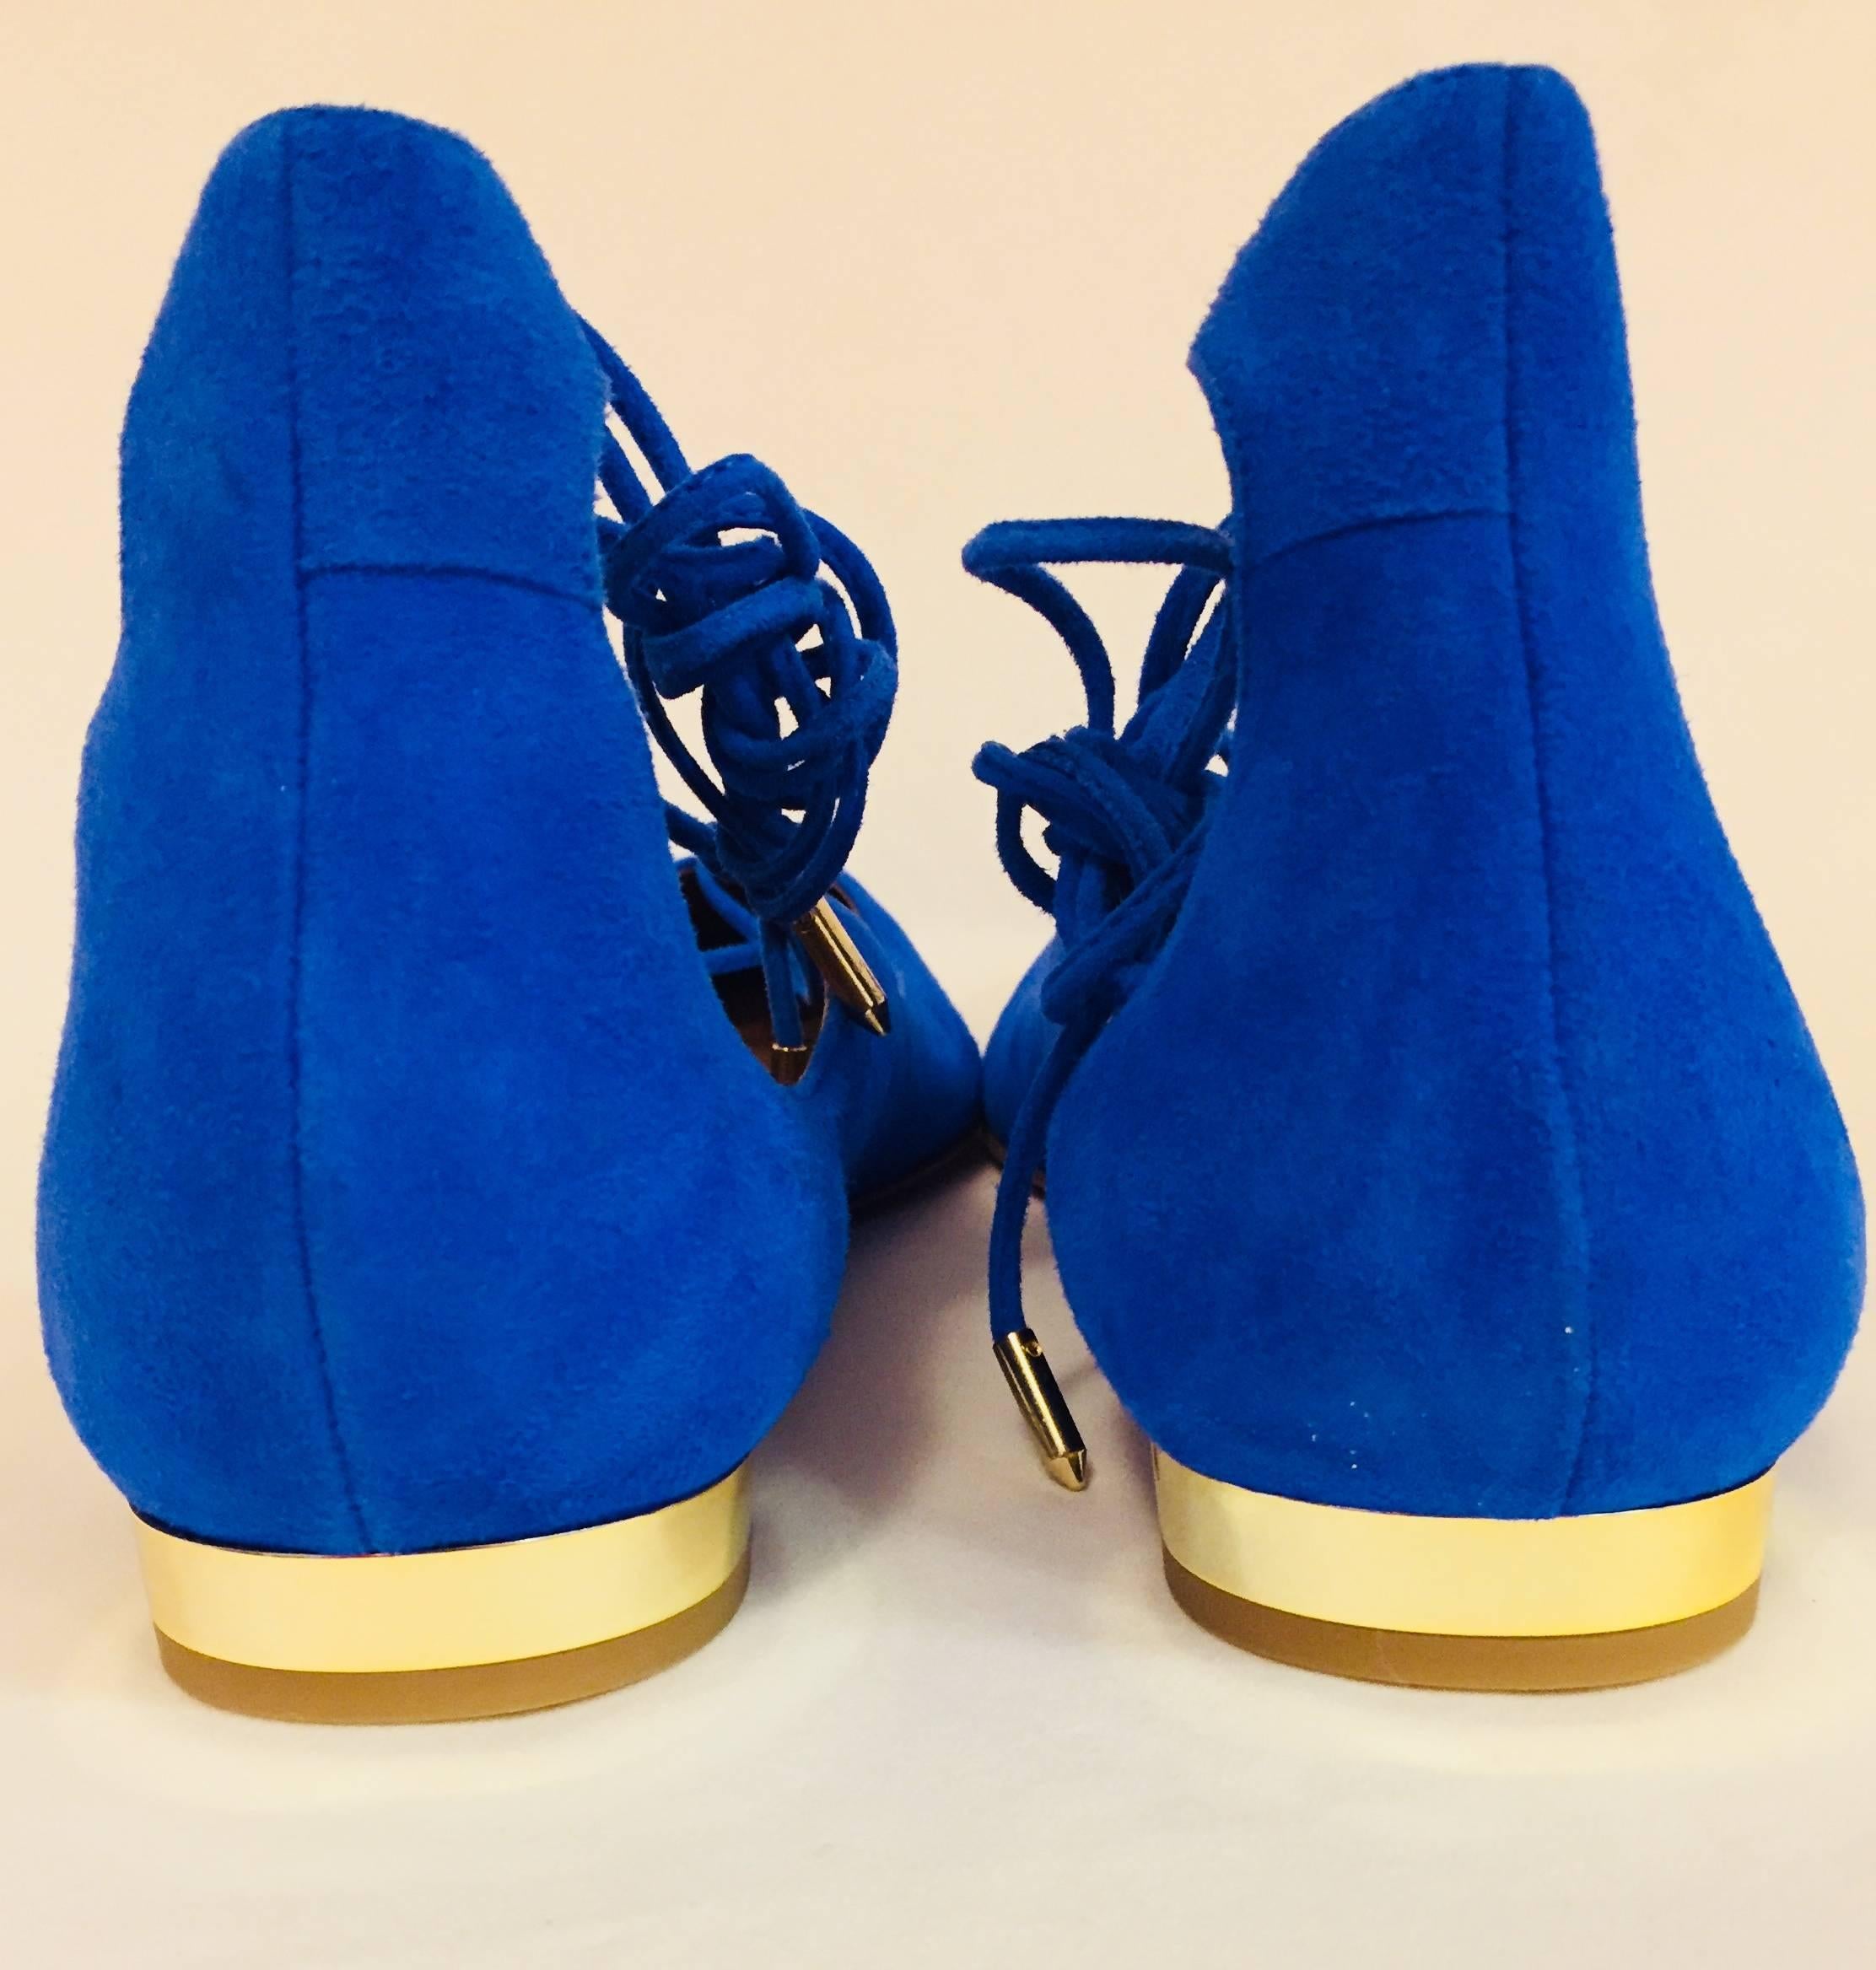 Aquazzura electric blue suede flats offer just the right amount of feminine mystique with crisscross suede laces and polished aglets.  Fabulous?   Yes!  Taupe Italian leather lining and sole.  The heels are finished with a flash of gold tone metal